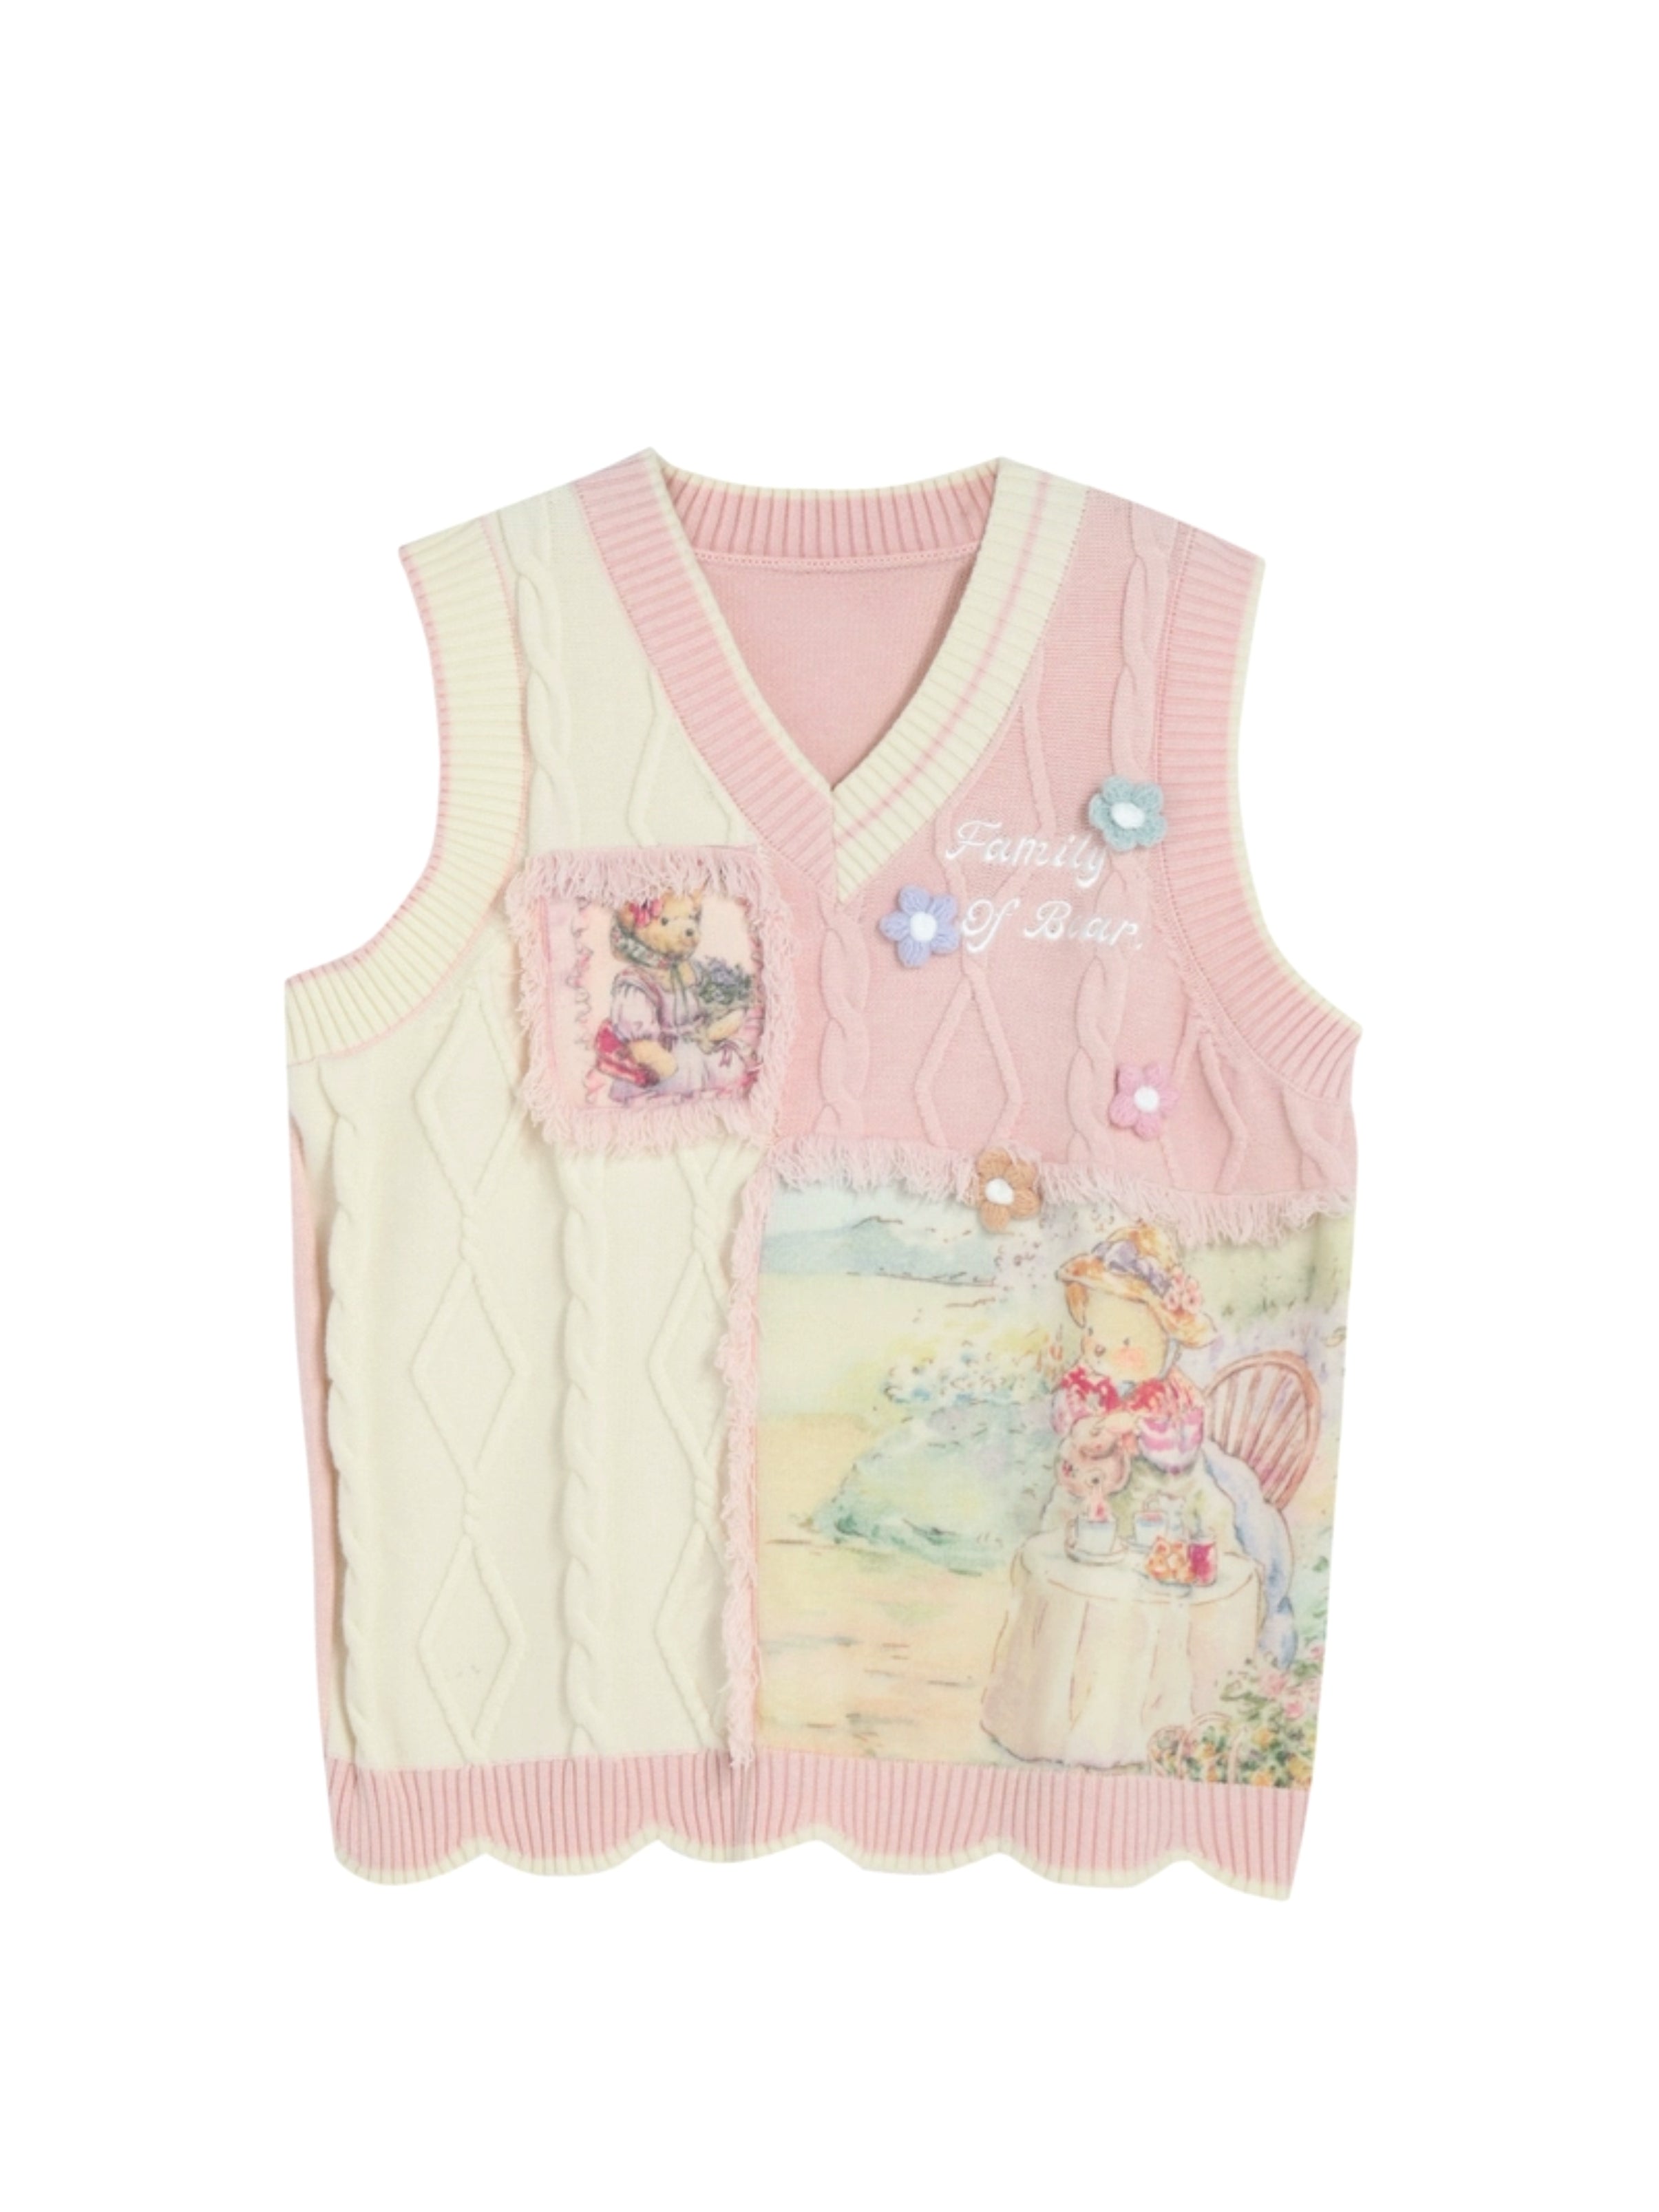 Family of Bears Cute Oil Painting Vest Knit-ntbhshop